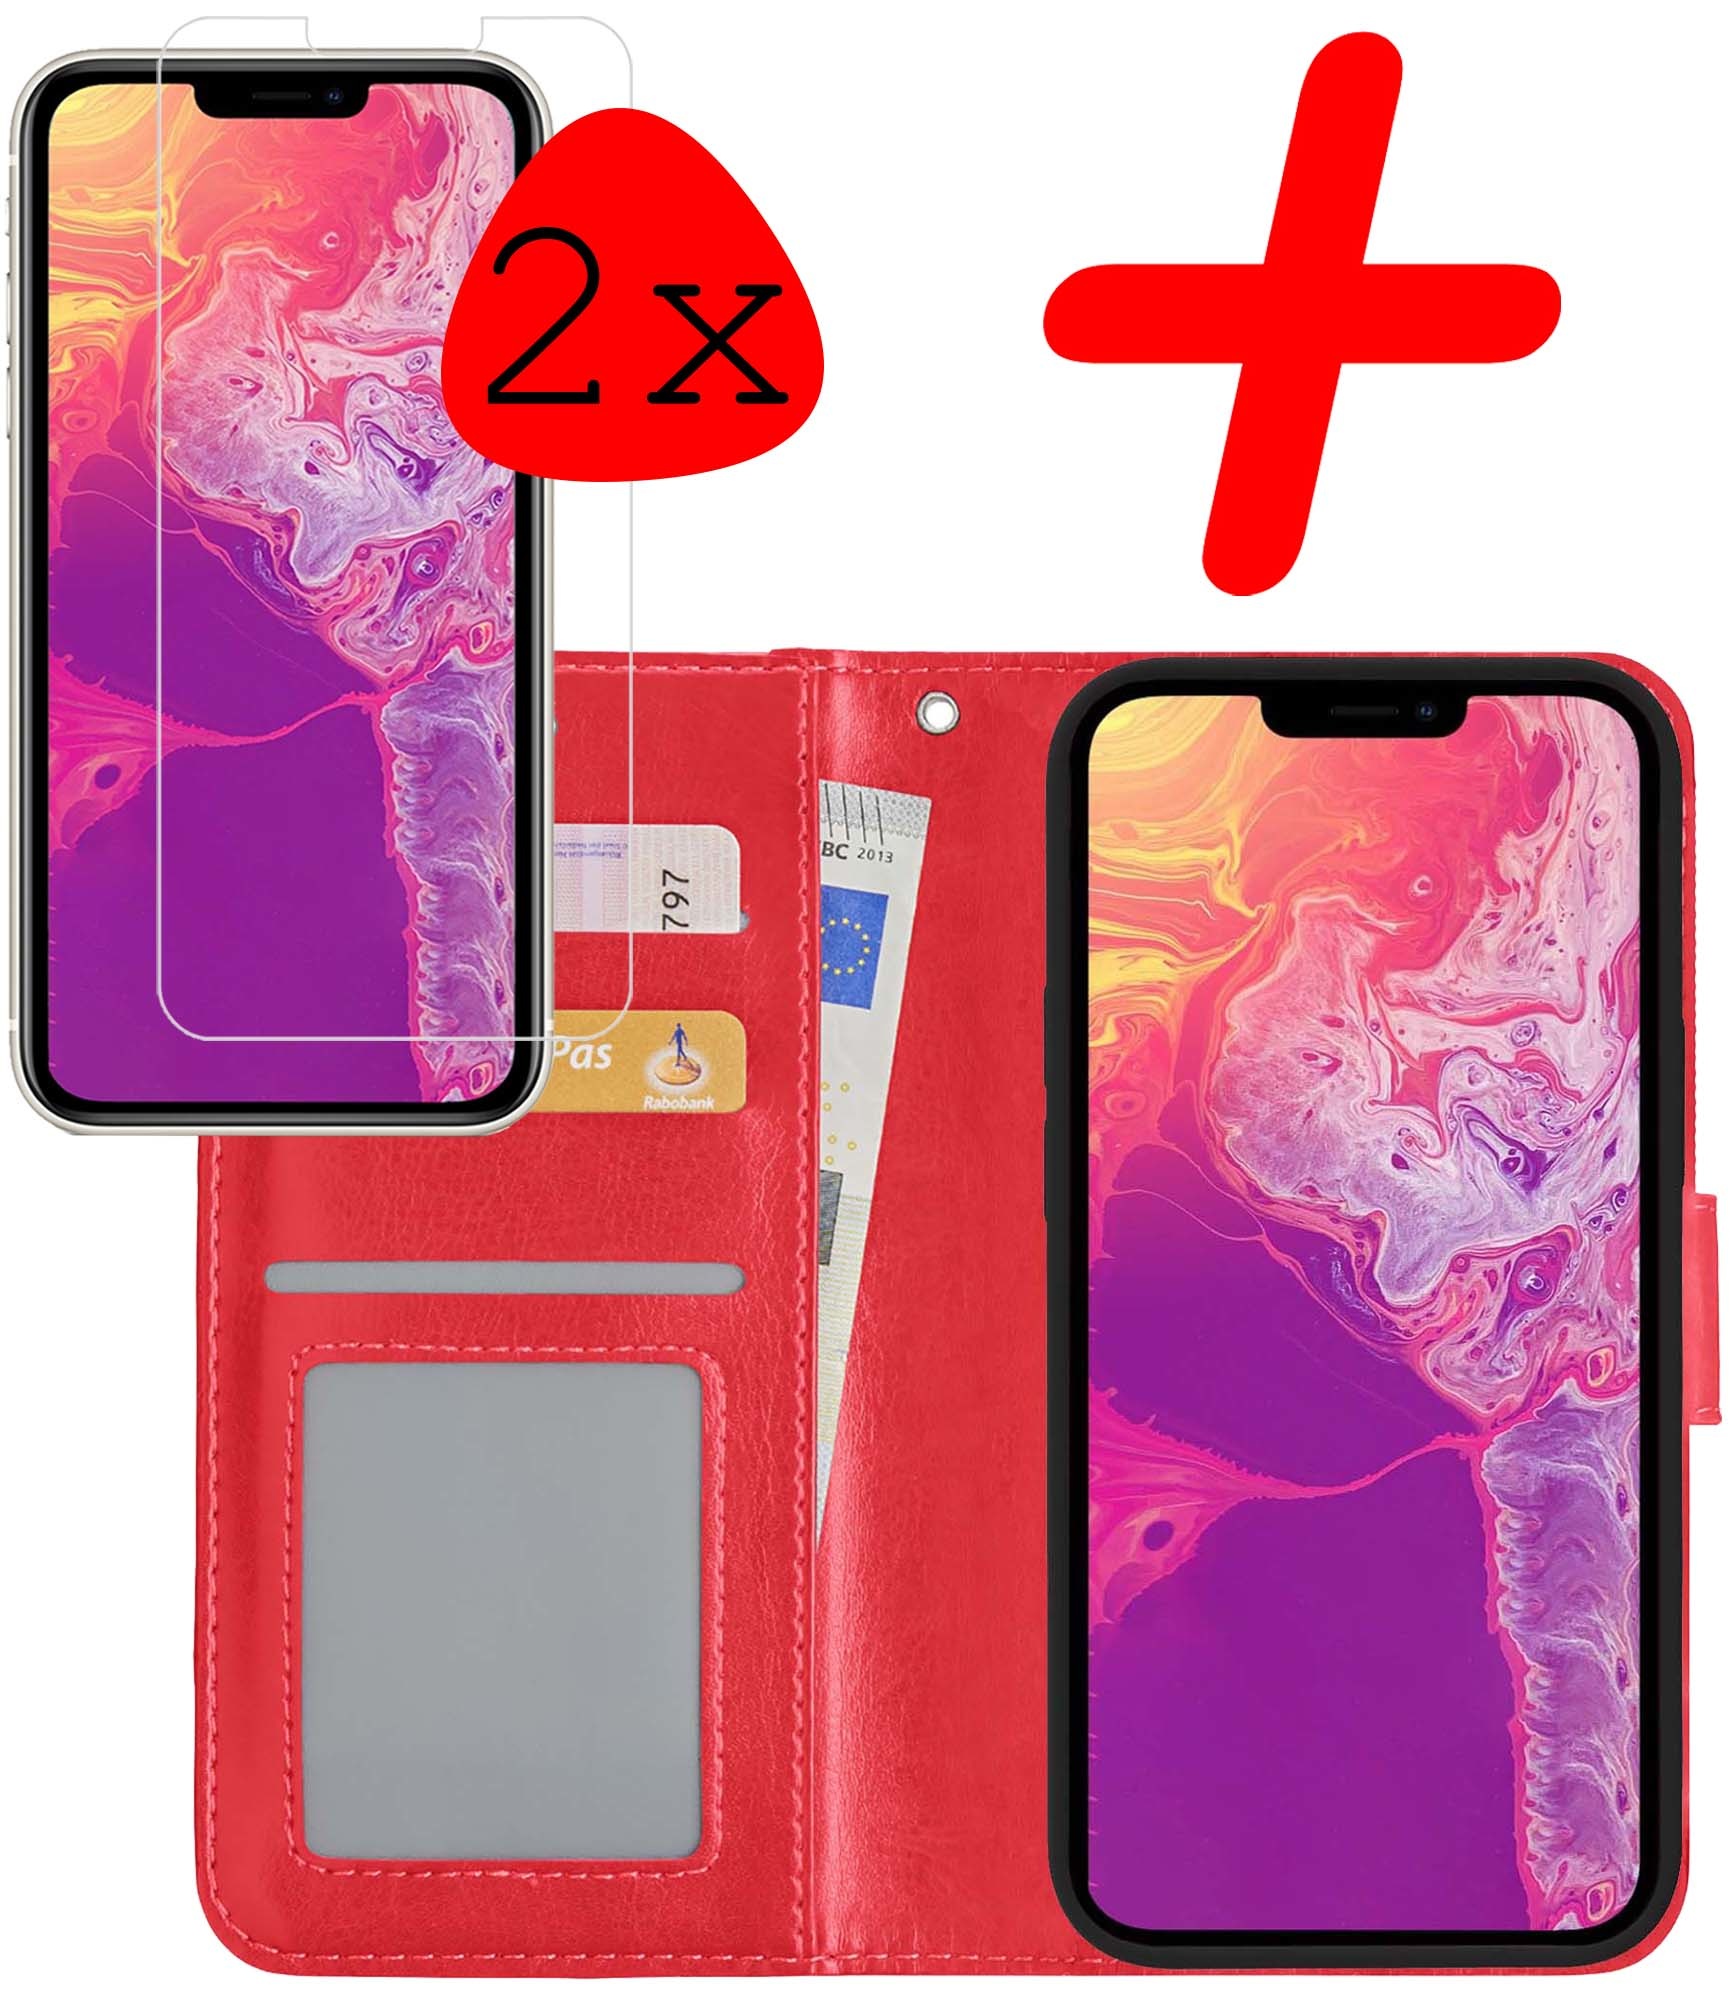 BASEY. iPhone 13 Pro Max Hoesje Bookcase 2x Screenprotector - iPhone 13 Pro Max Case Hoes Cover - iPhone 13 Pro Max Screenprotector 2x - Rood